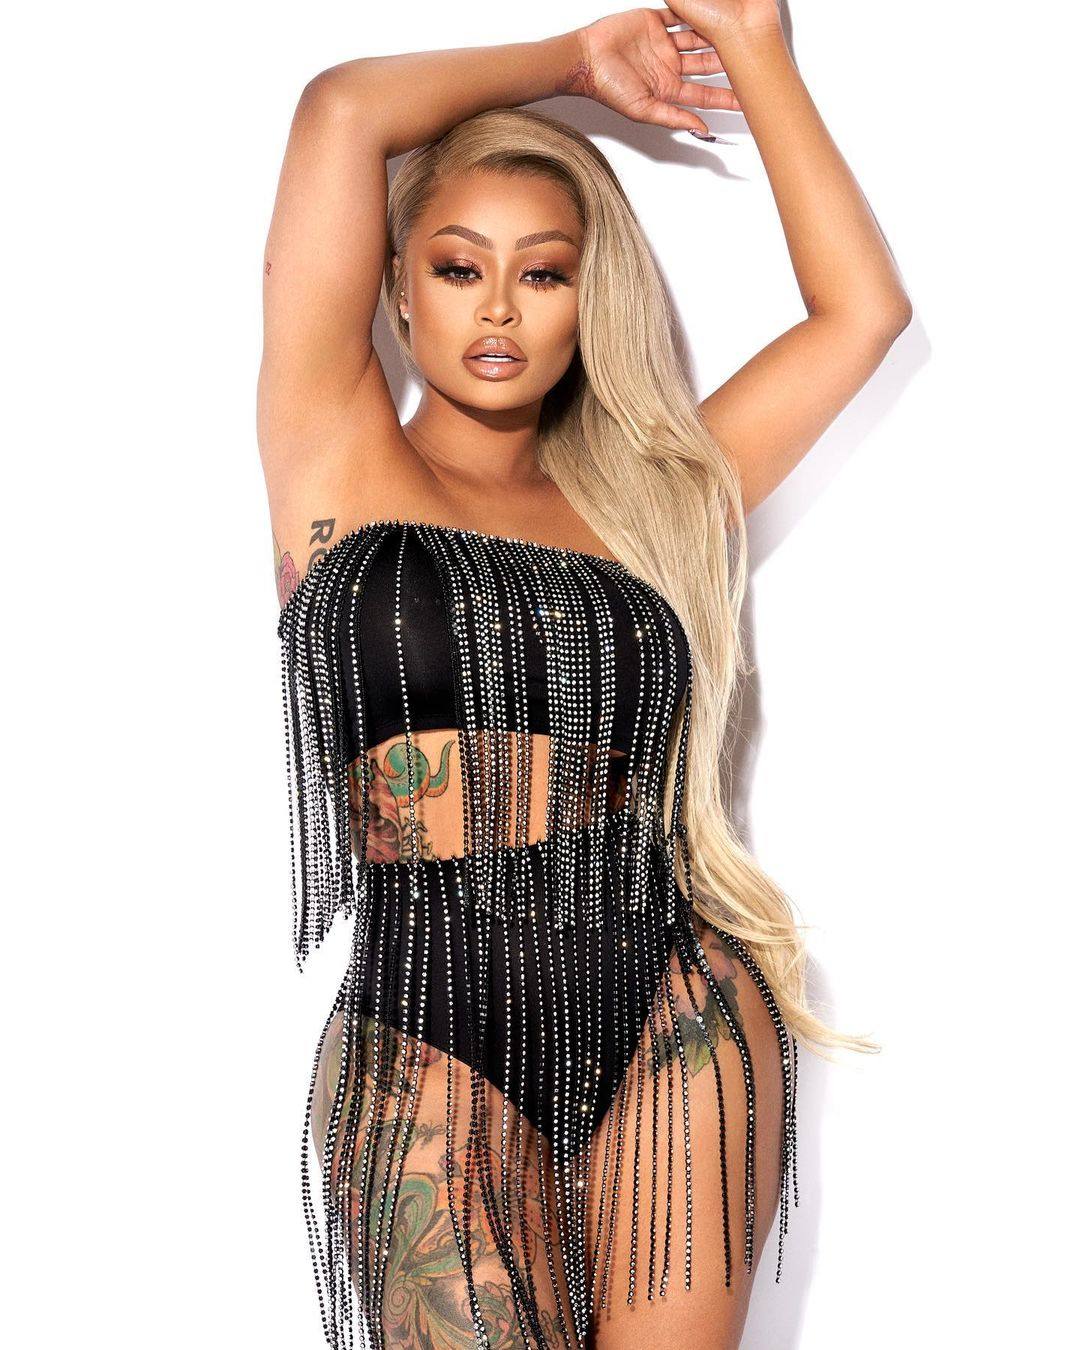 Everything you need to know about Blac Chyna and her feud with the Kardashians. Photo: @blacchyna/Instagram